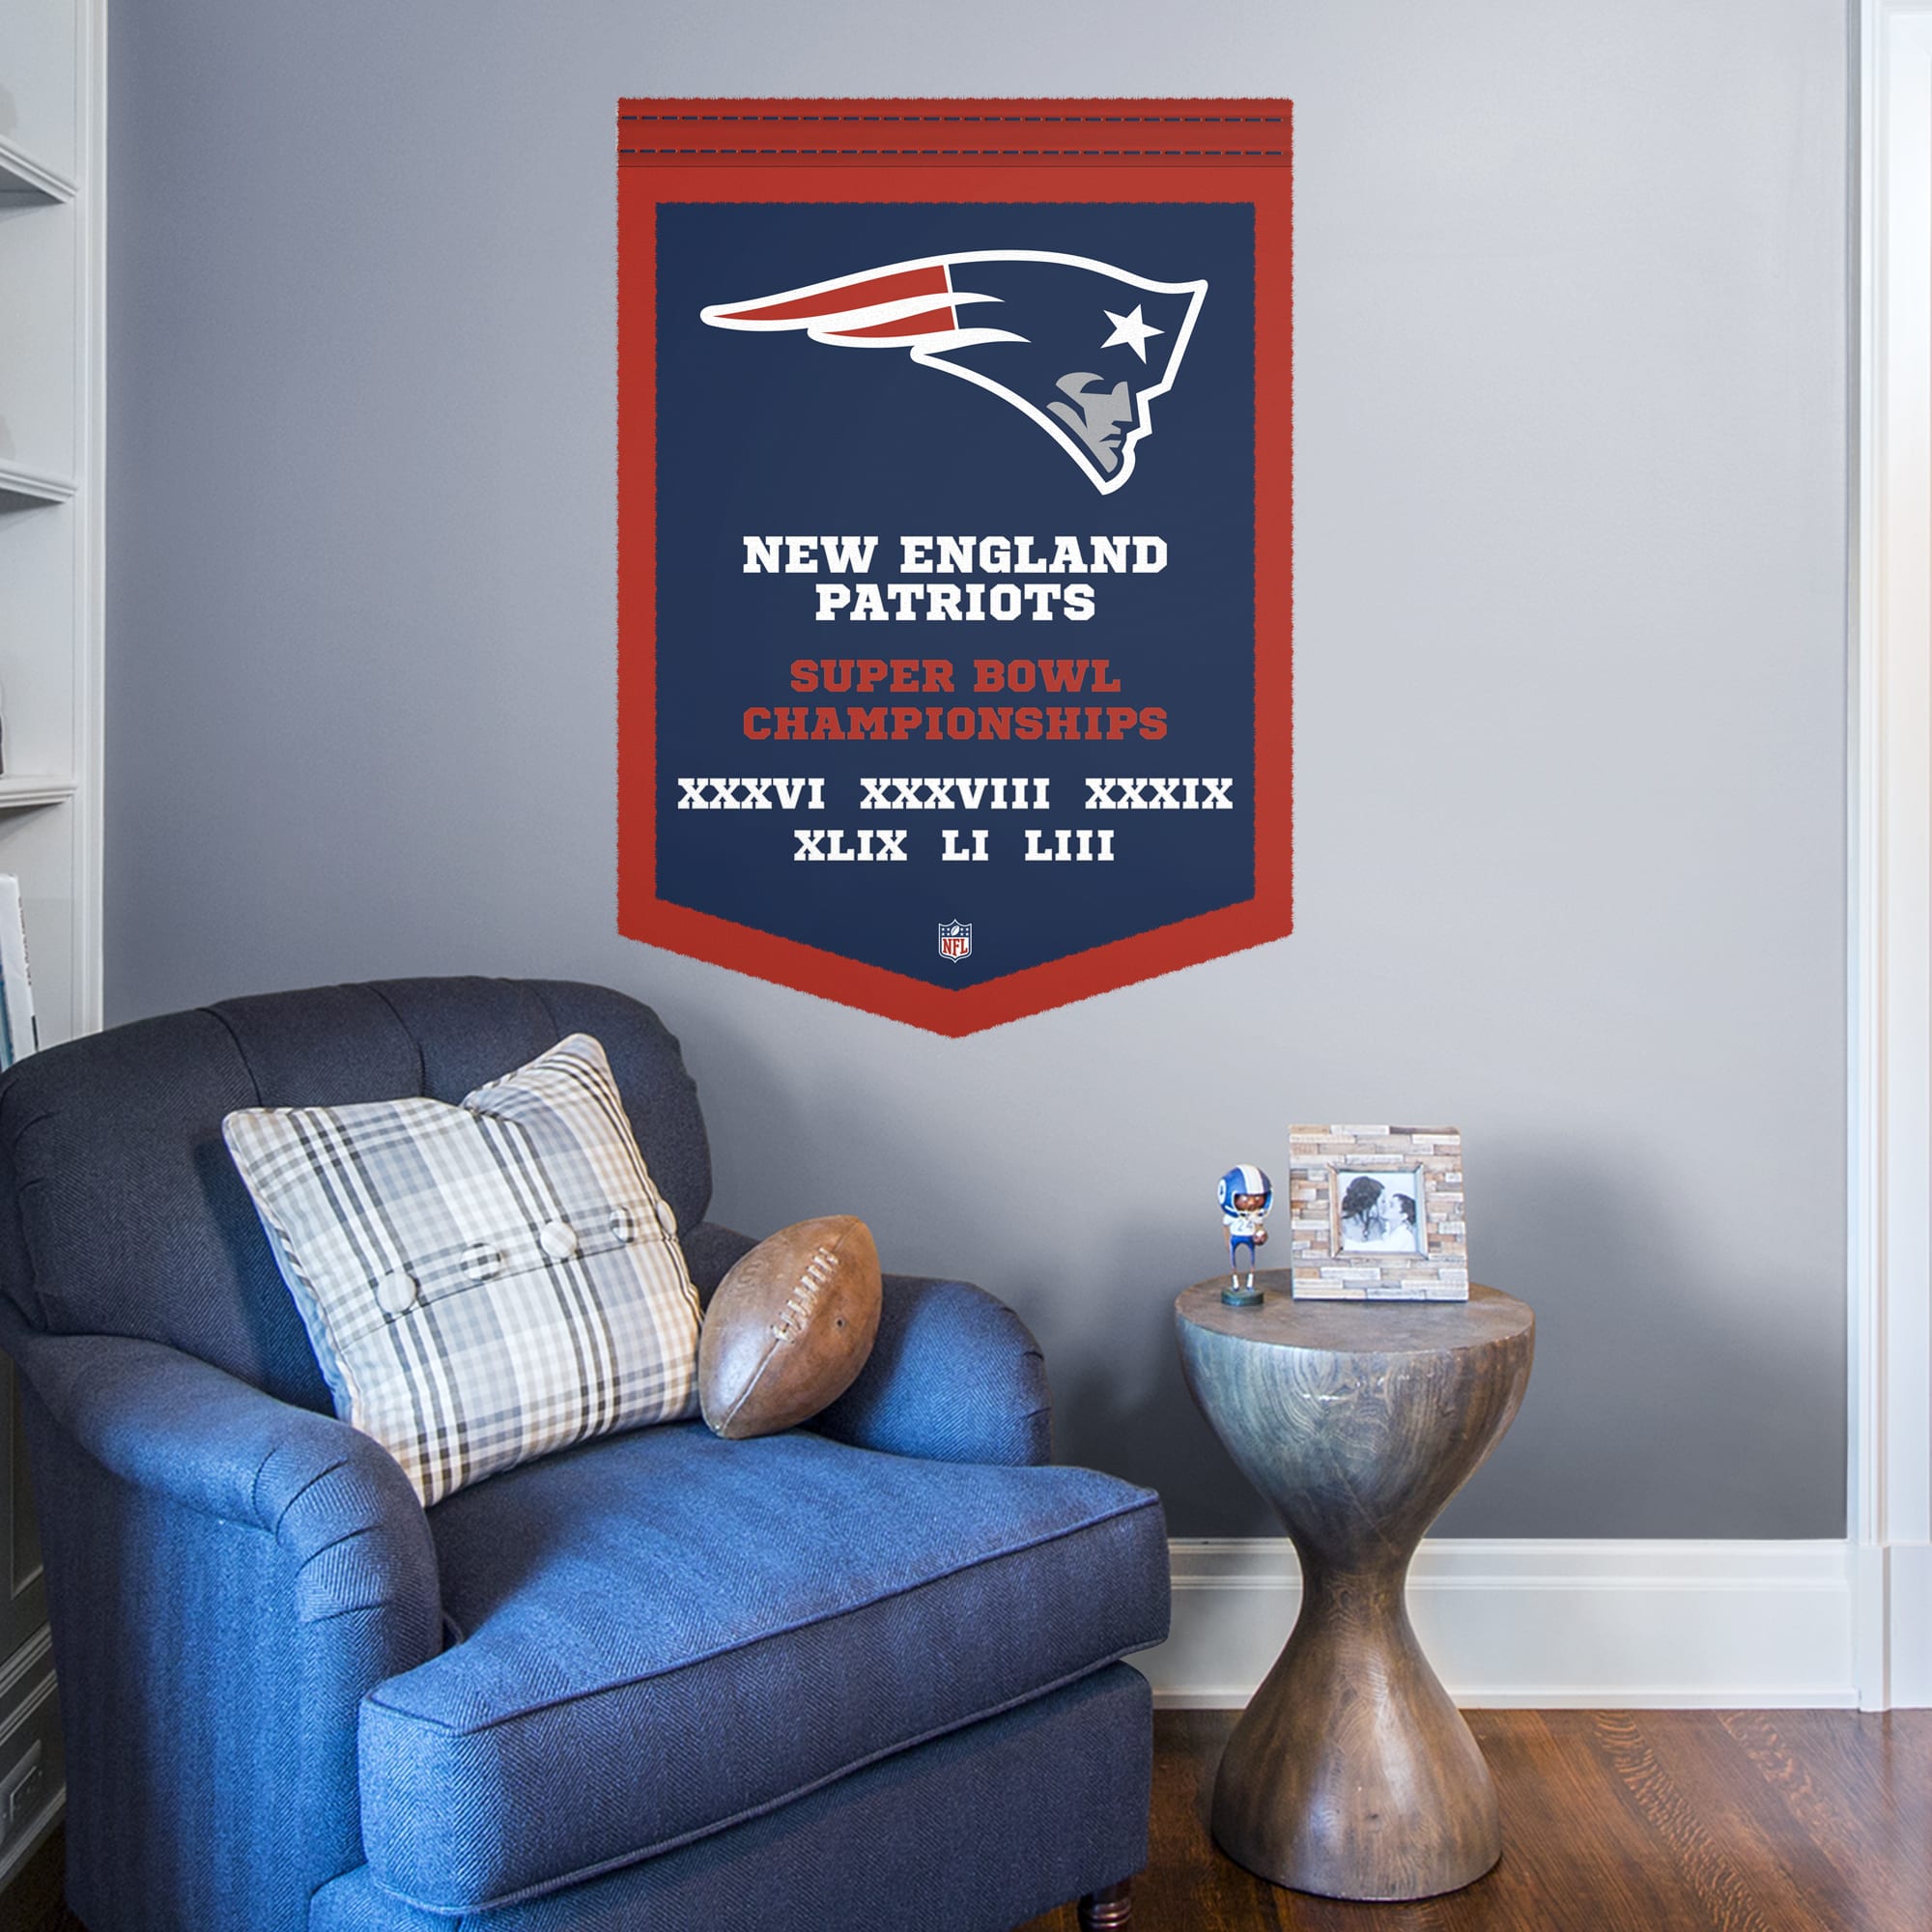 New England Patriots: Super Bowl Championships Banner - Officially Licensed NFL Removable Wall Decal 34.0"W x 48.0"H by Fathead